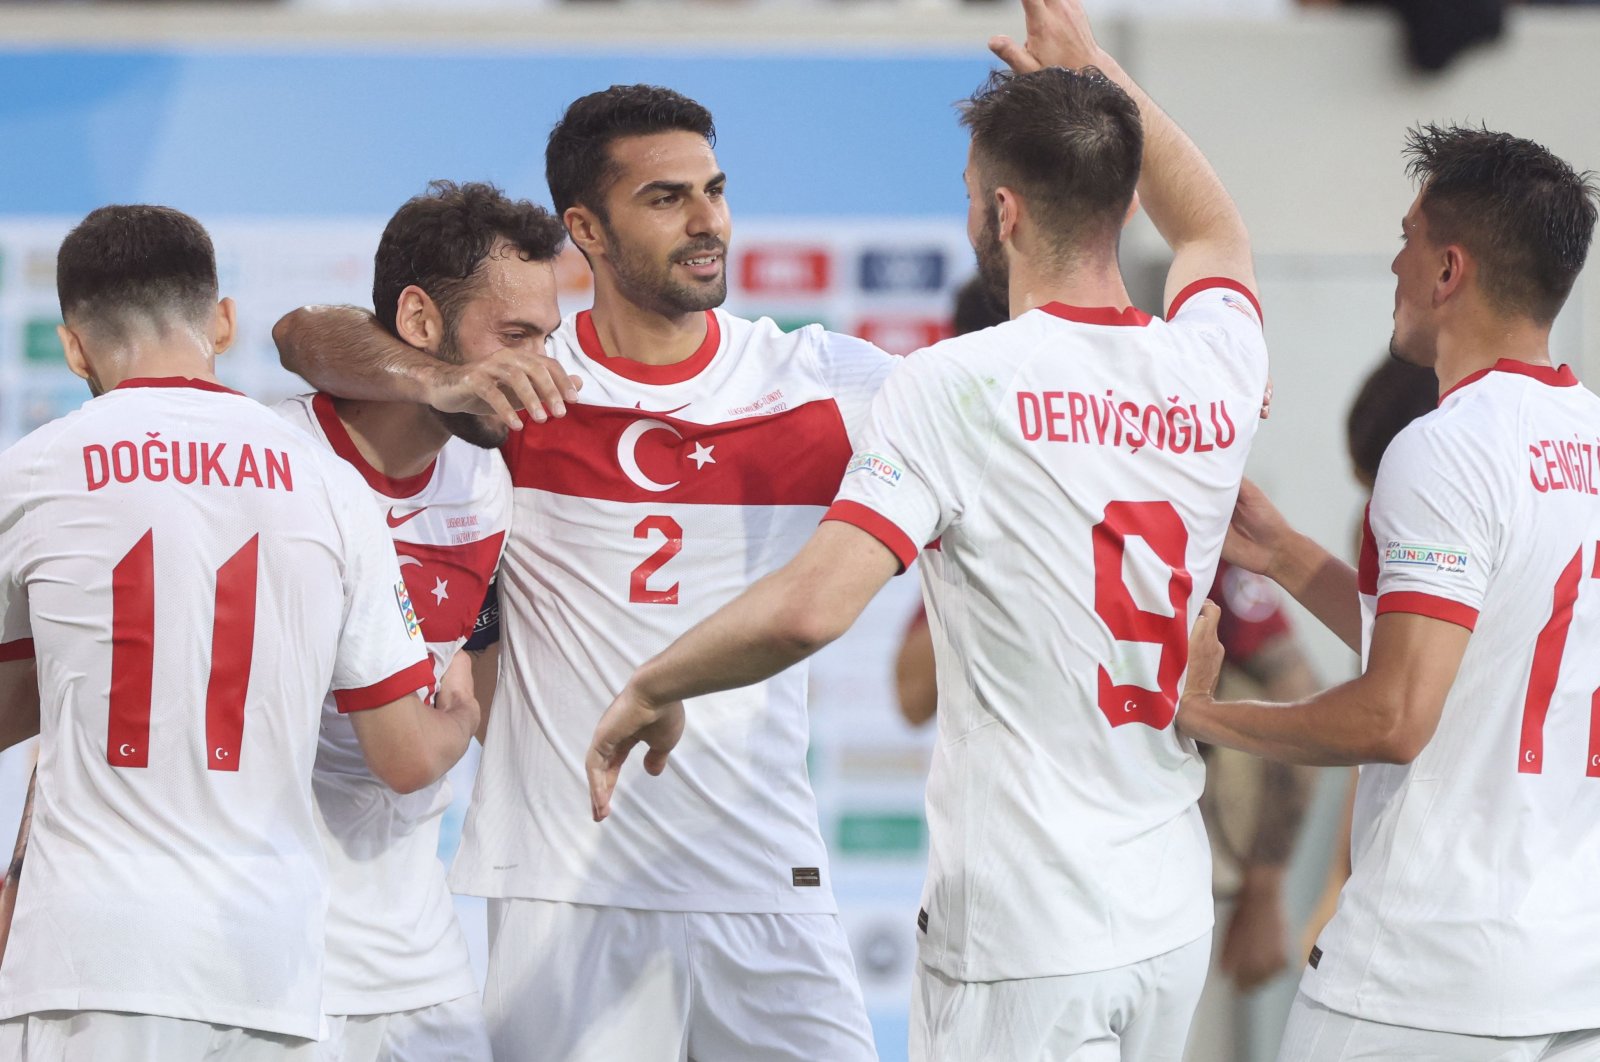 Turkish players celebrate a goal in a UEFA Nations League match against Luxembourg in Luxembourg City, June 11, 2022. (AFP Photo)